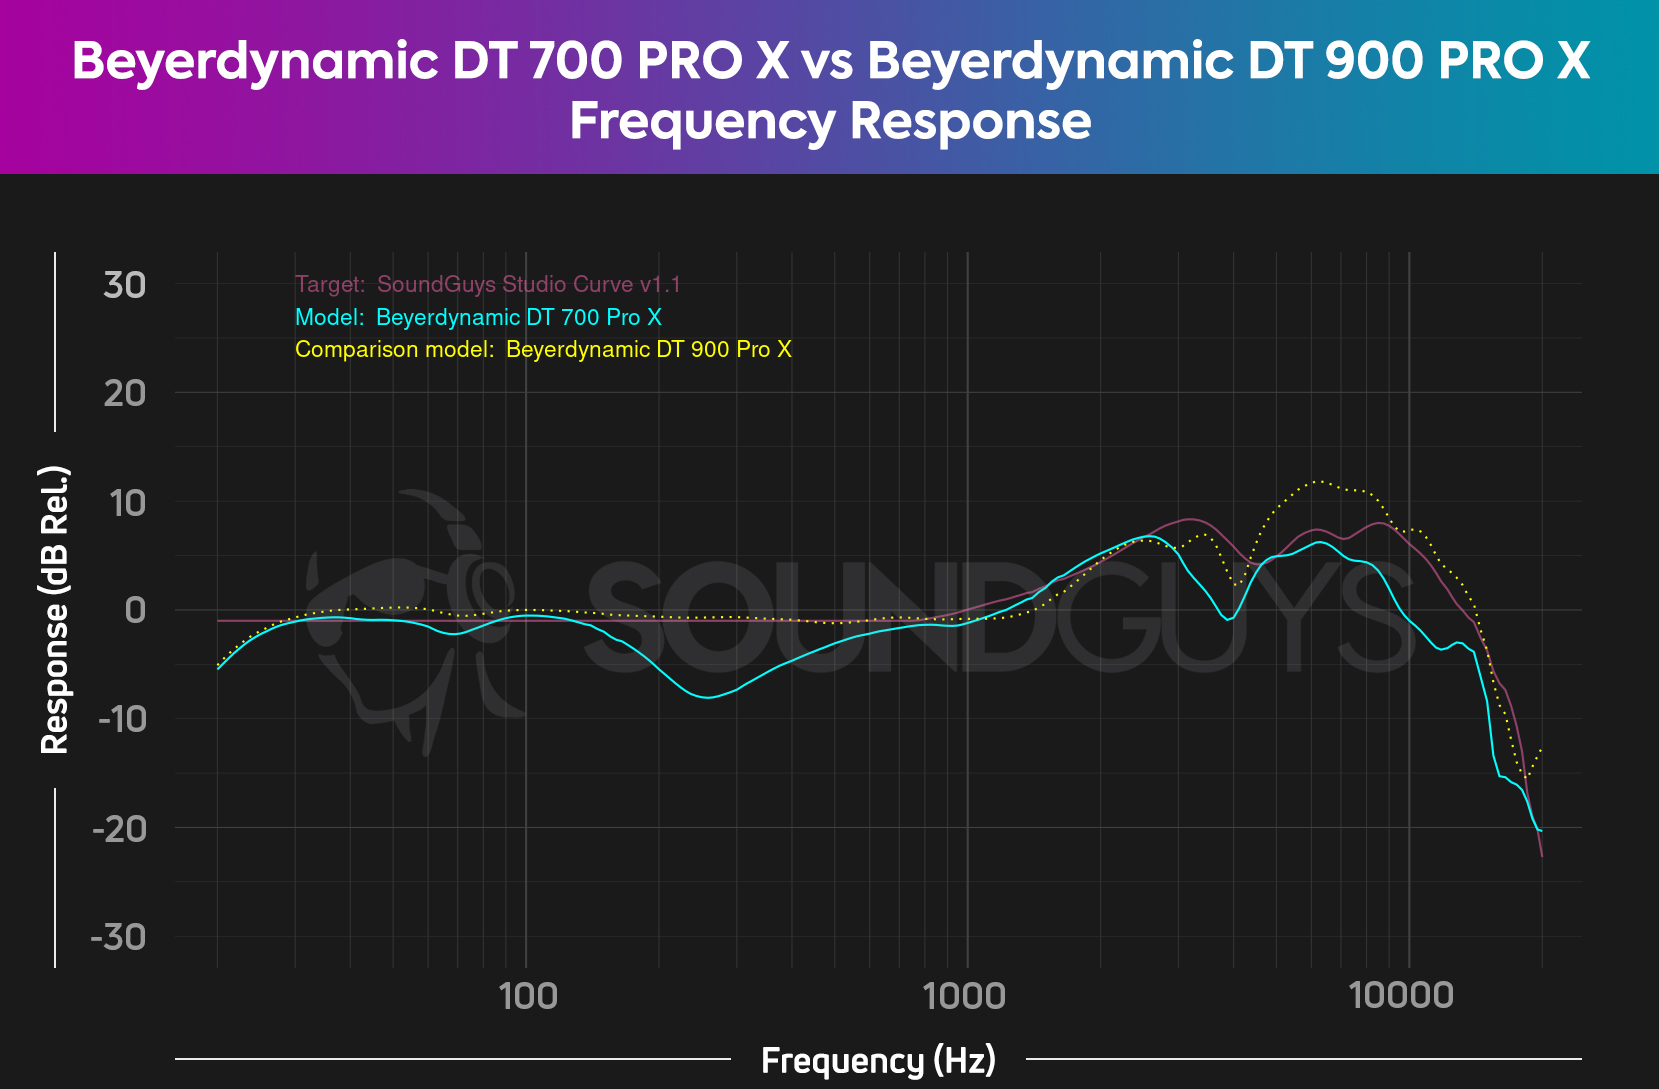 A frequency response chart traces the Beyerdynamic DT 700 PRO X and Beyerdynamic DT 900 PRO X against the ideal studio curve.